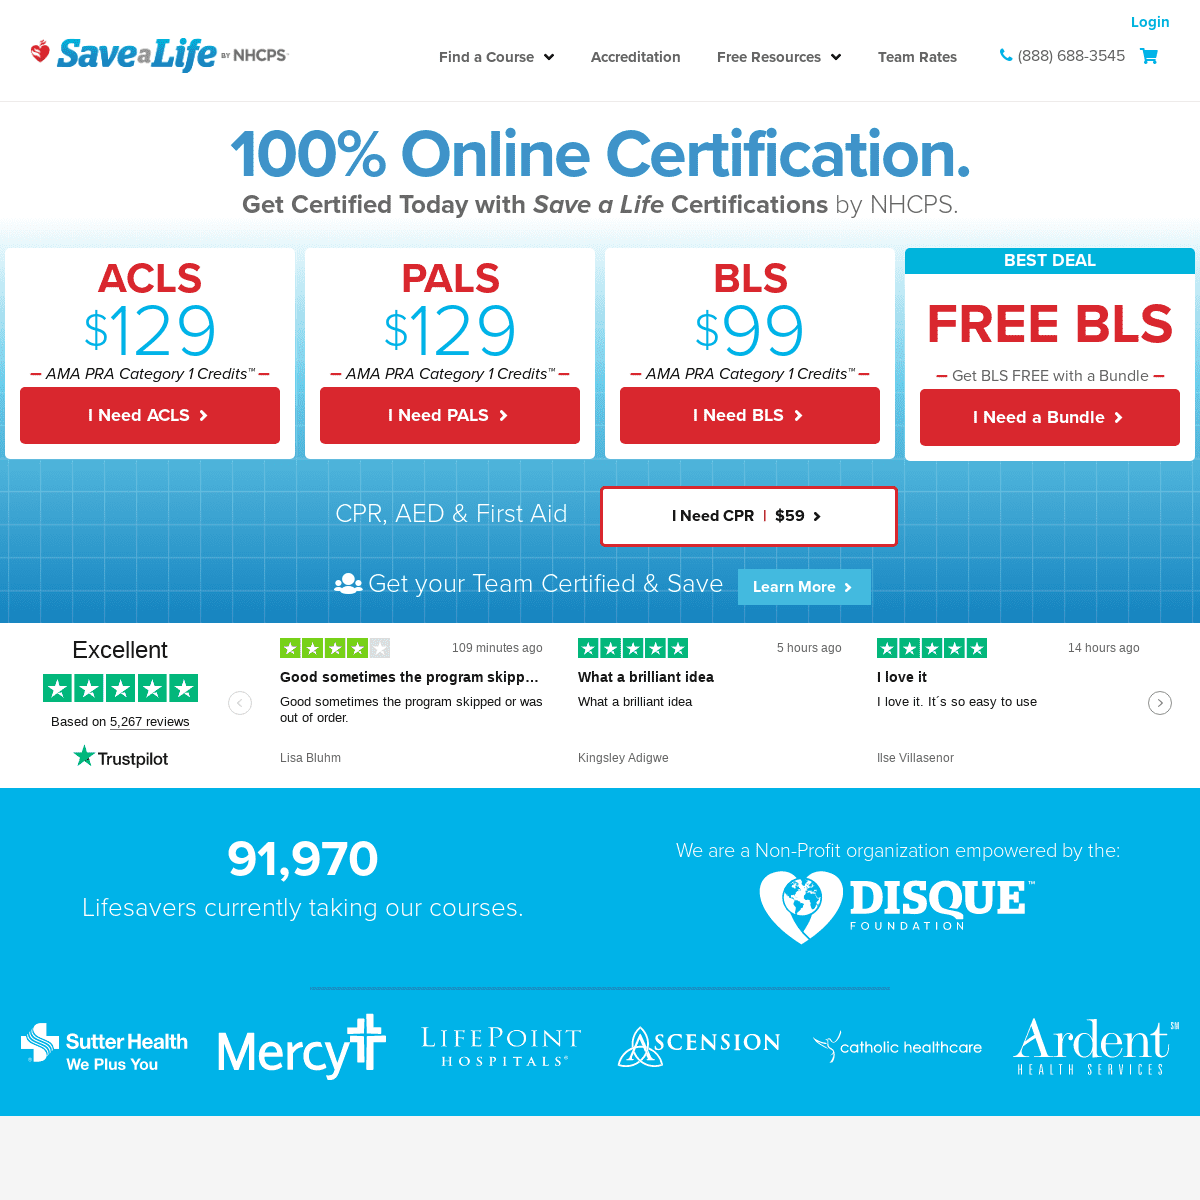 NHCPS.com - ACLS, PALS, BLS, CPR & First Aid